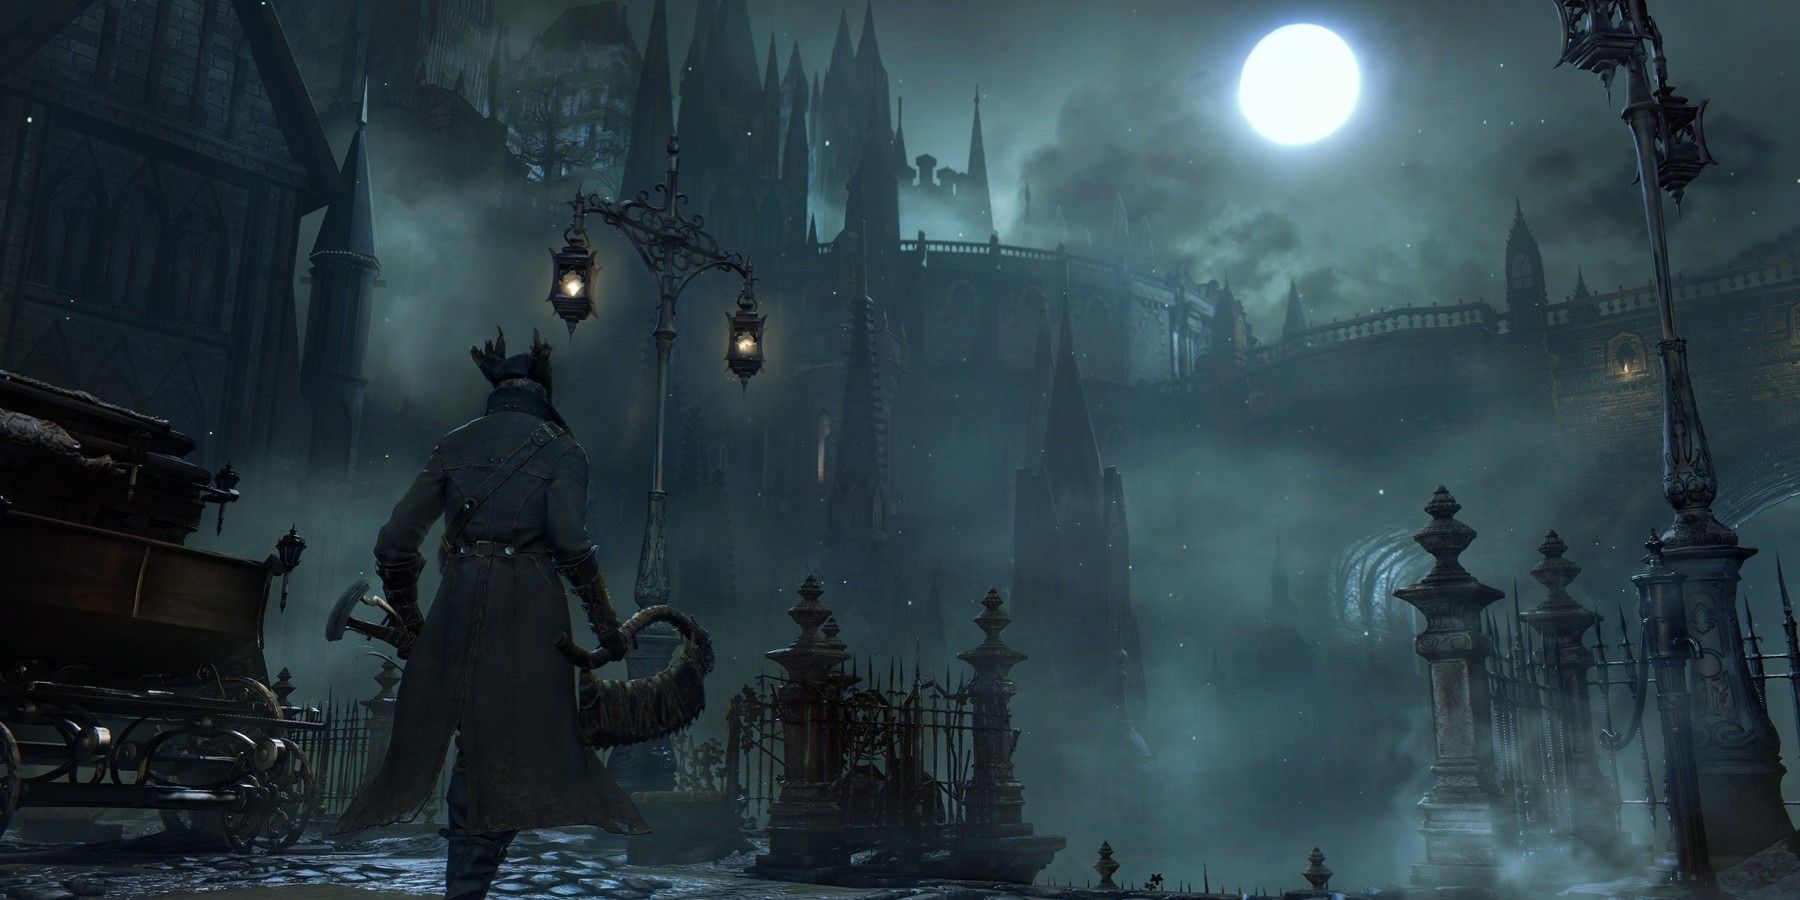 How Bloodborne On PC Can Improve From The PS4 Version